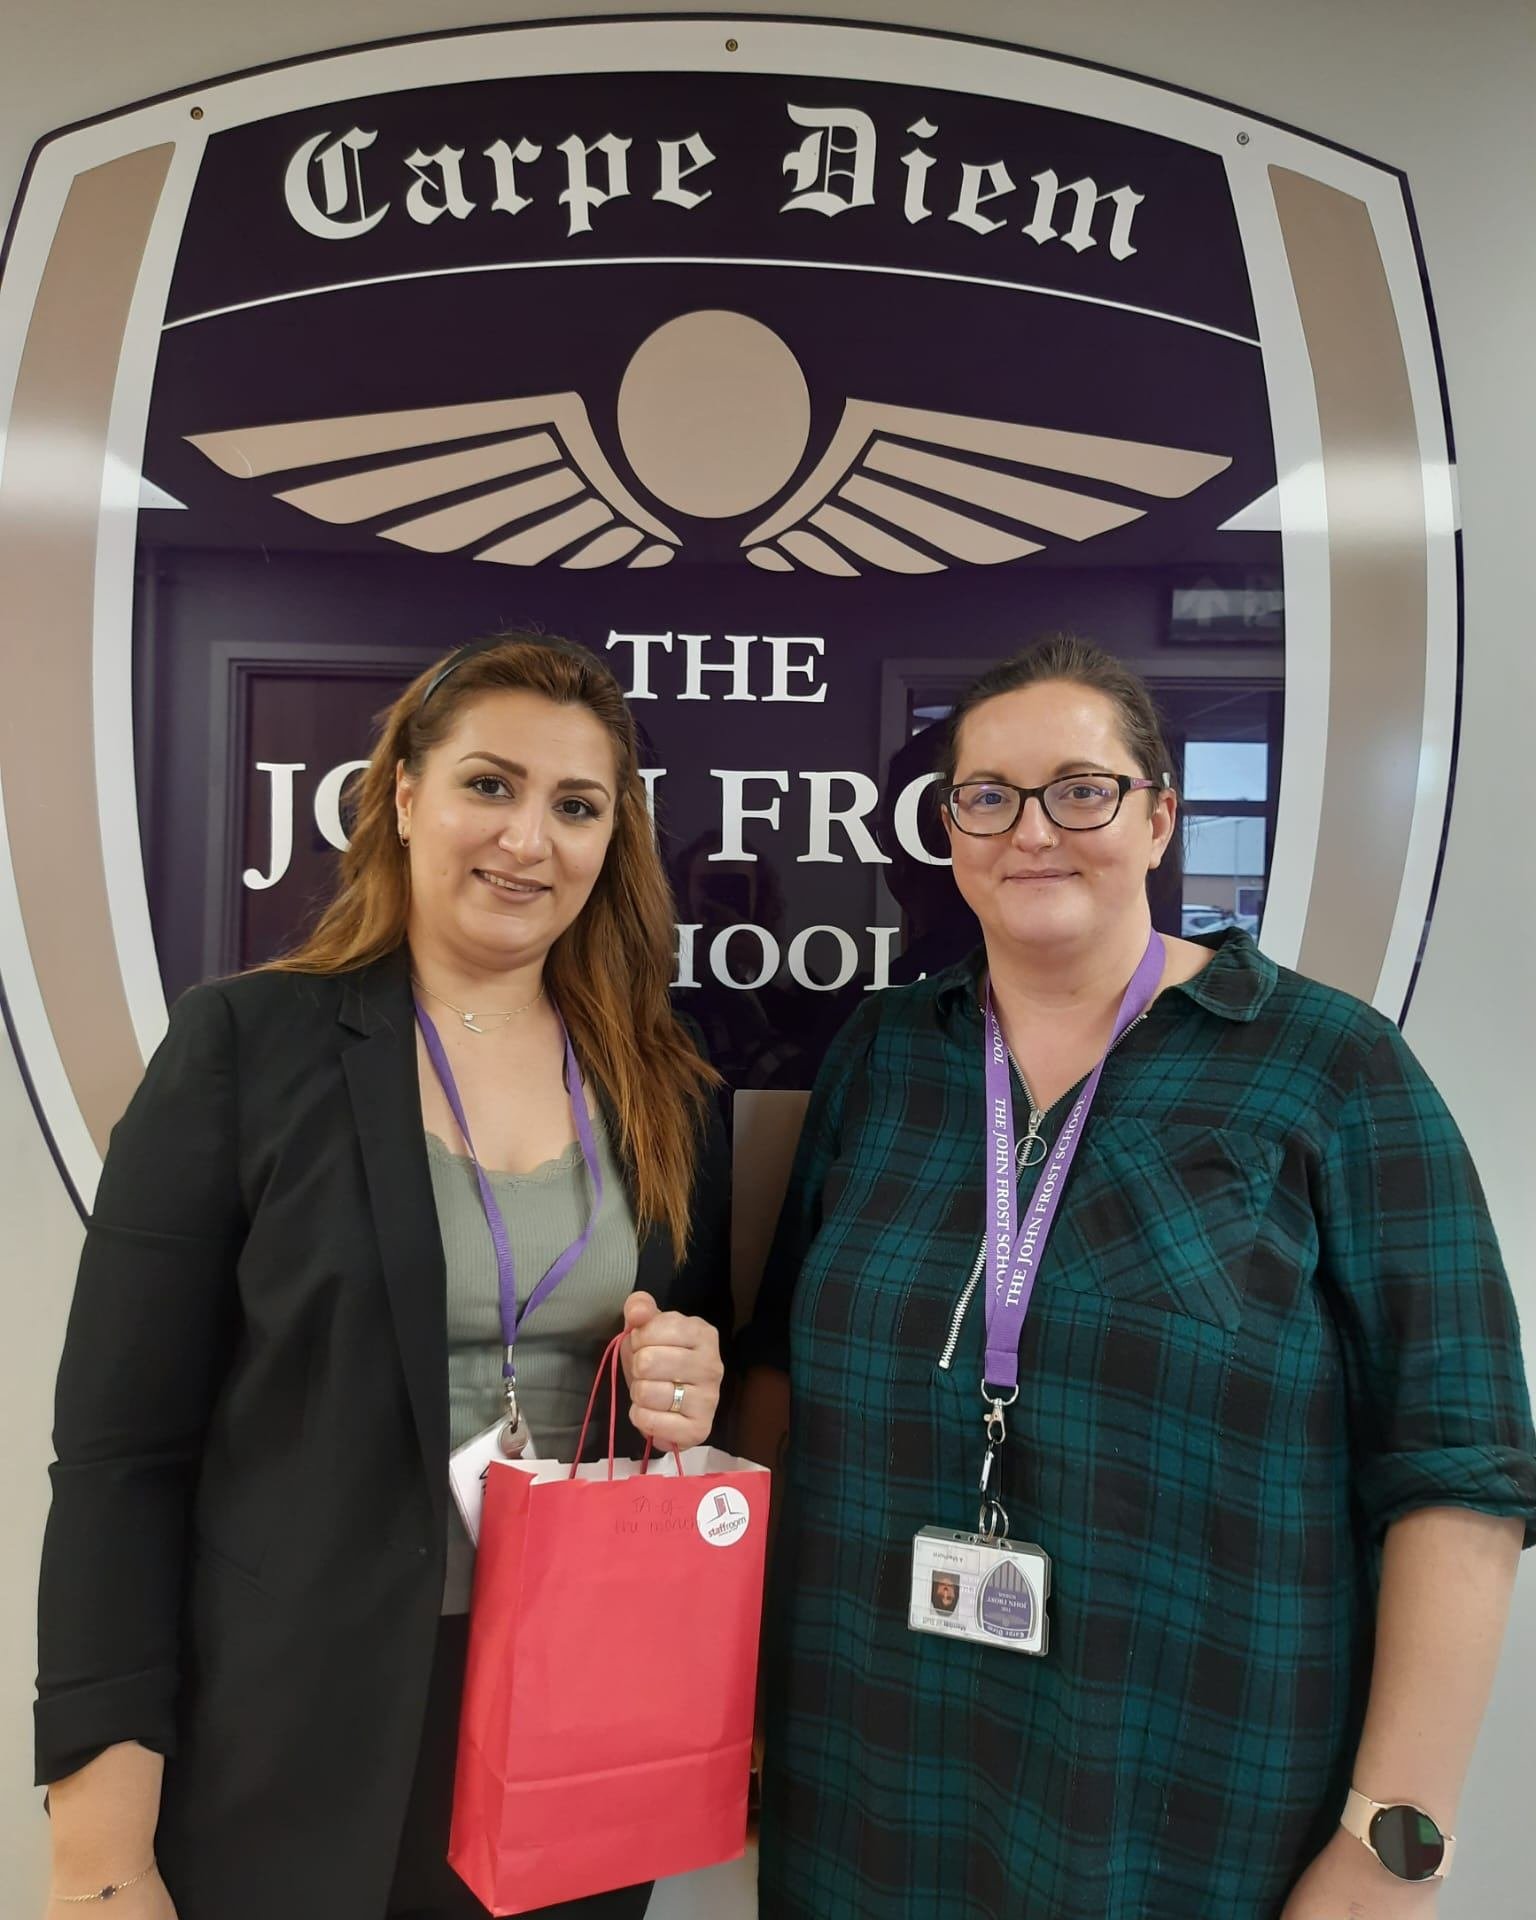 Congratulations to Khaula our Teaching Assistant of the month who has been working at The John Frost School in Newport! Thanks to Becca for jumping in on the picture too👏📷

#tempfothemonth #employeeofthemonth #staffappreciation #edujobs